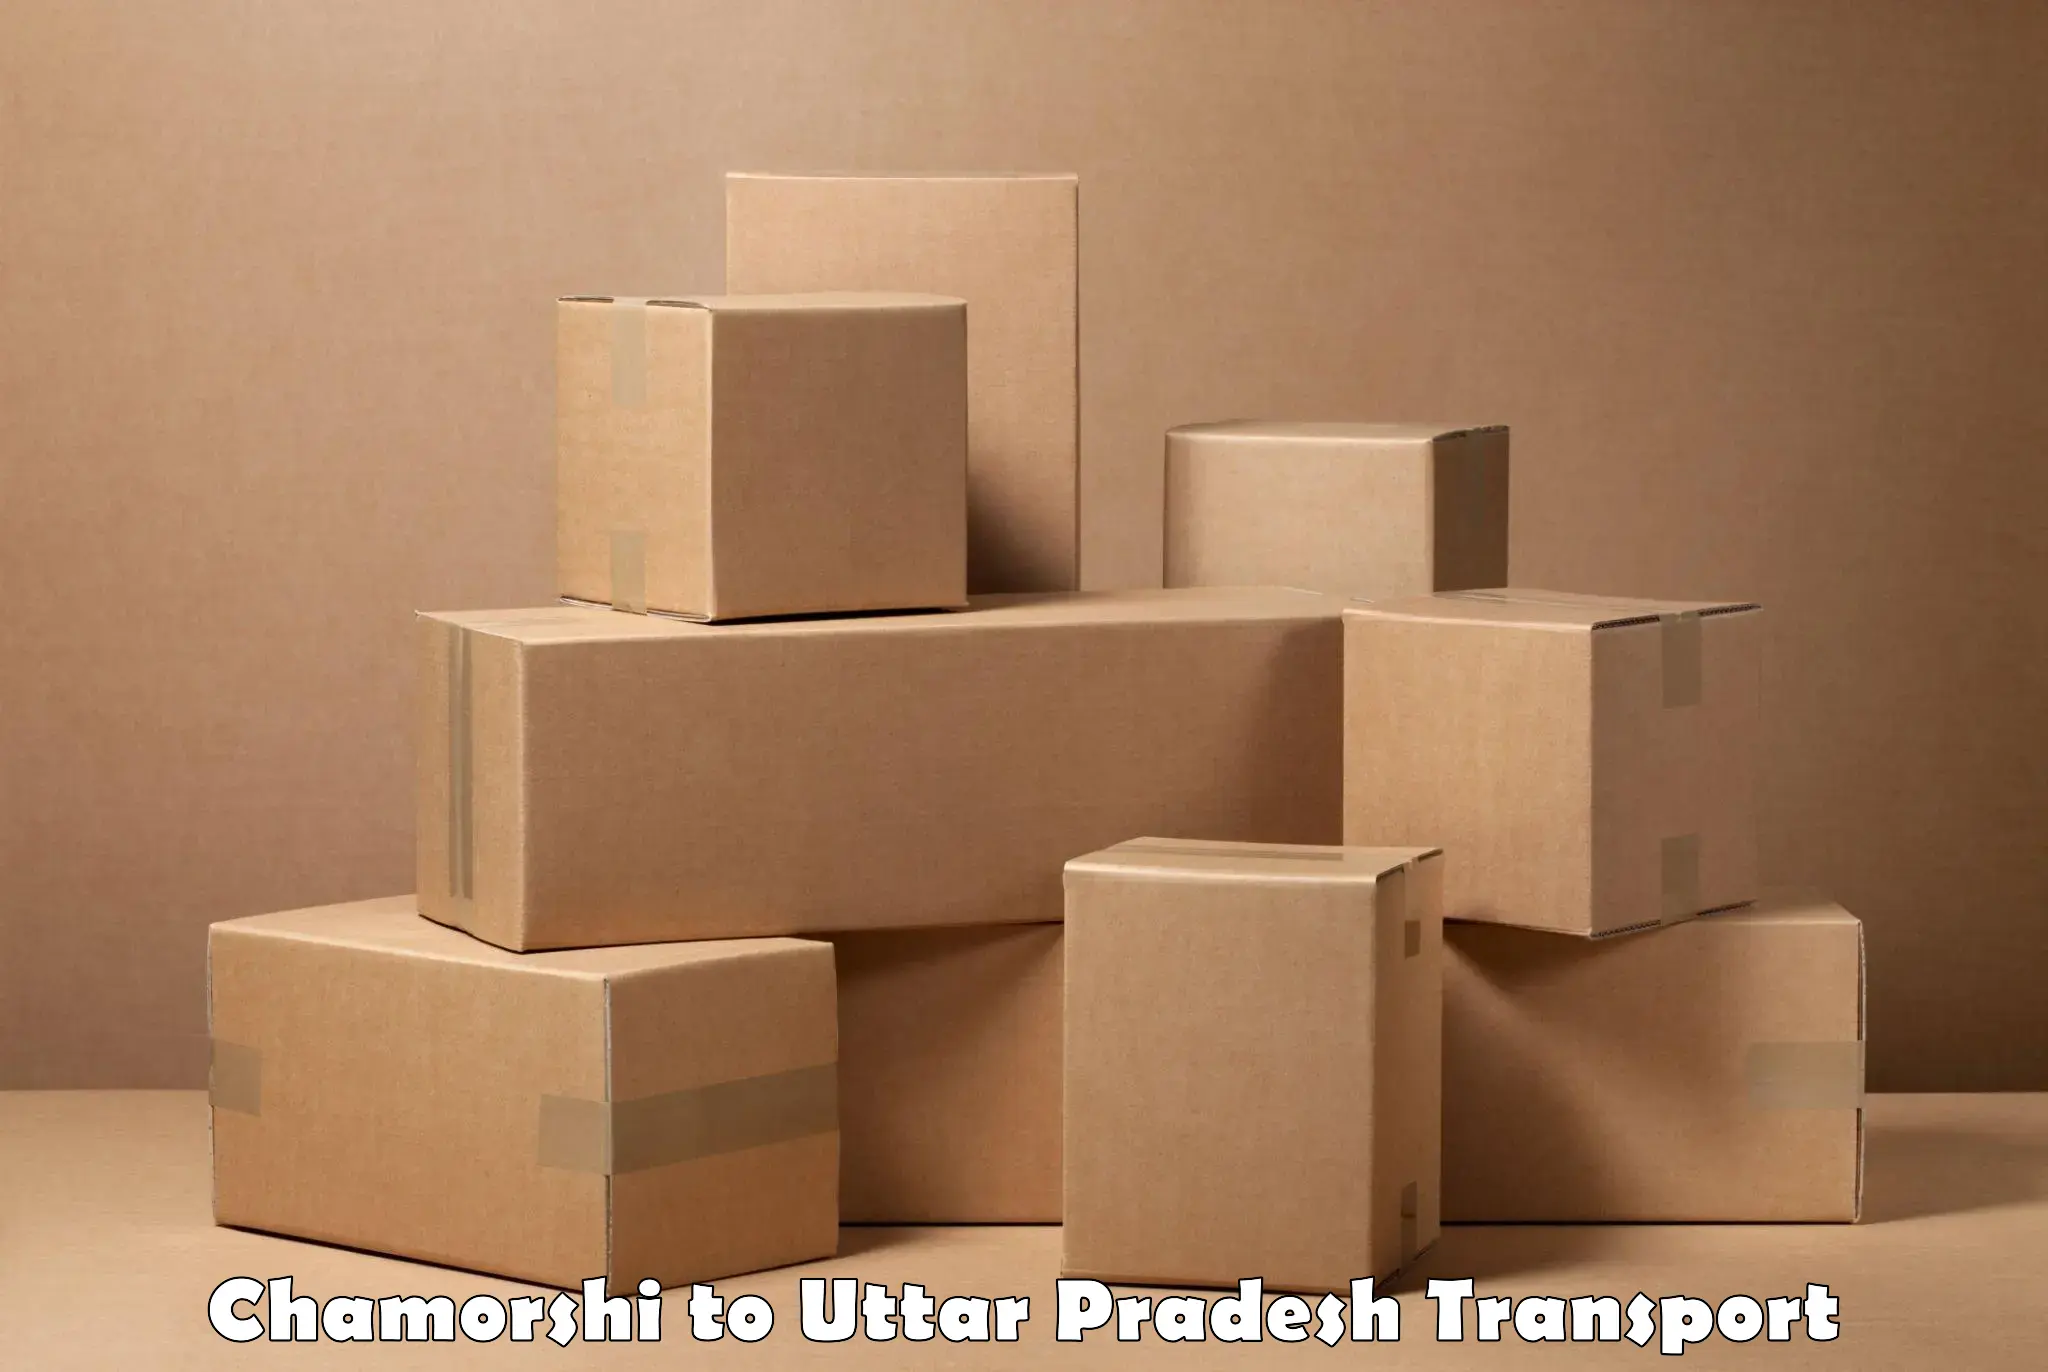 Cargo transport services in Chamorshi to Dohrighat